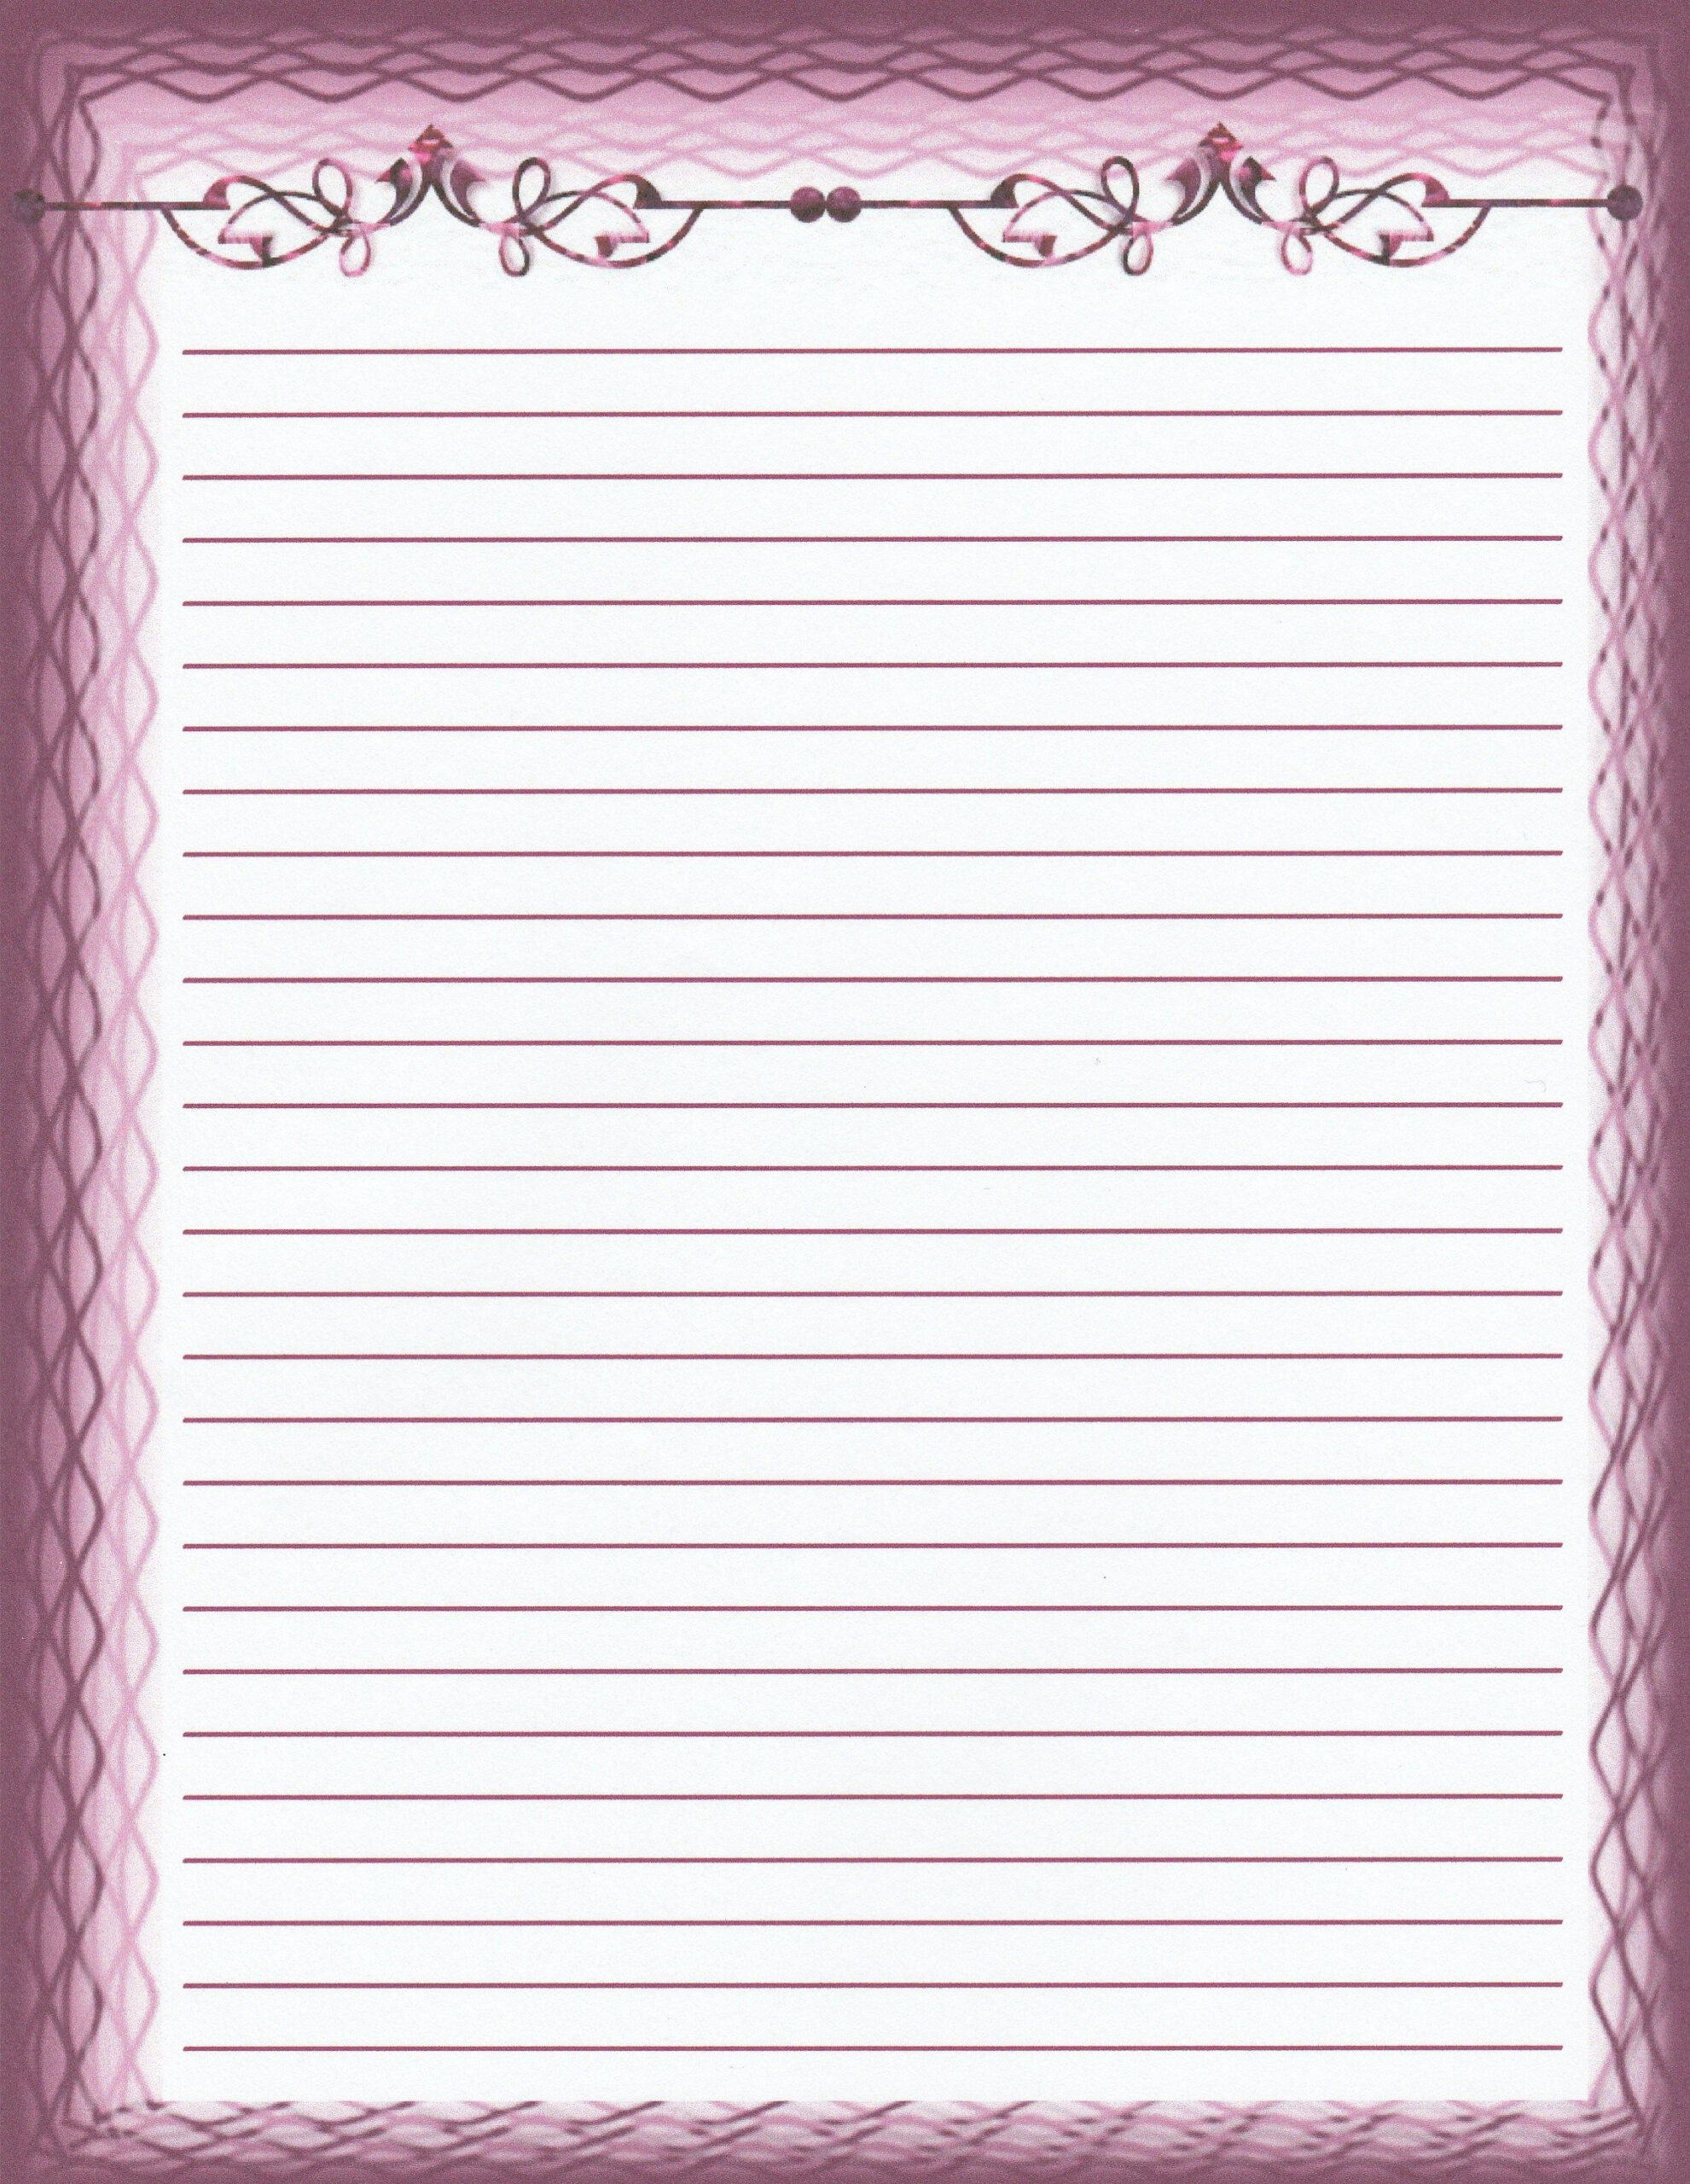 Lined Writing Stationery Paper